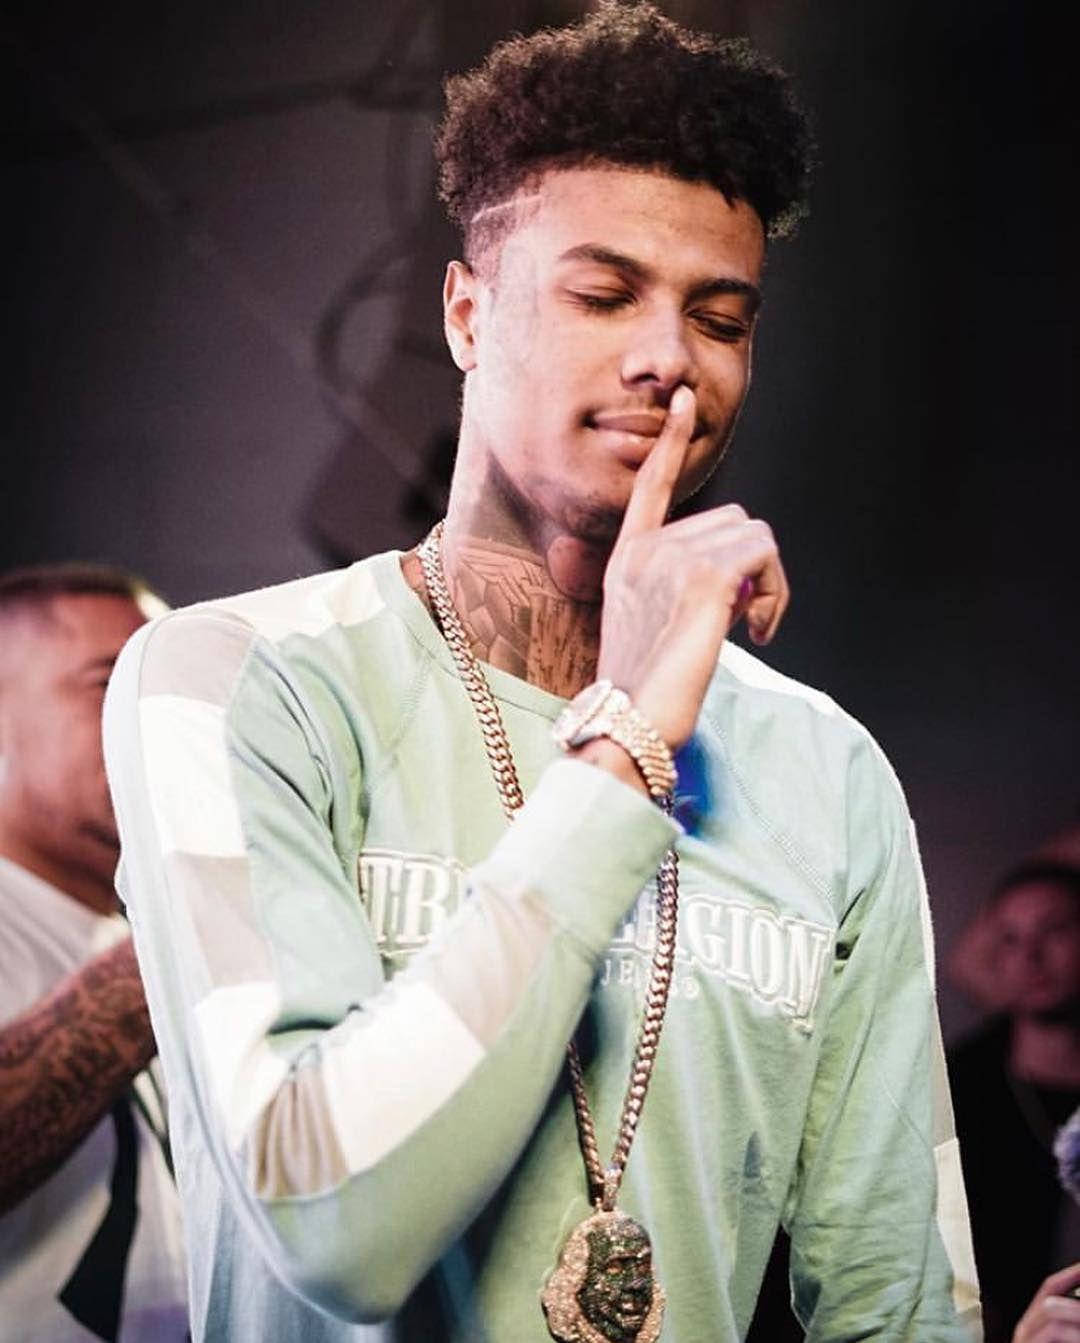 Instagram post by Blueface • Jan 2019 at 1:48am UTC. Blueface